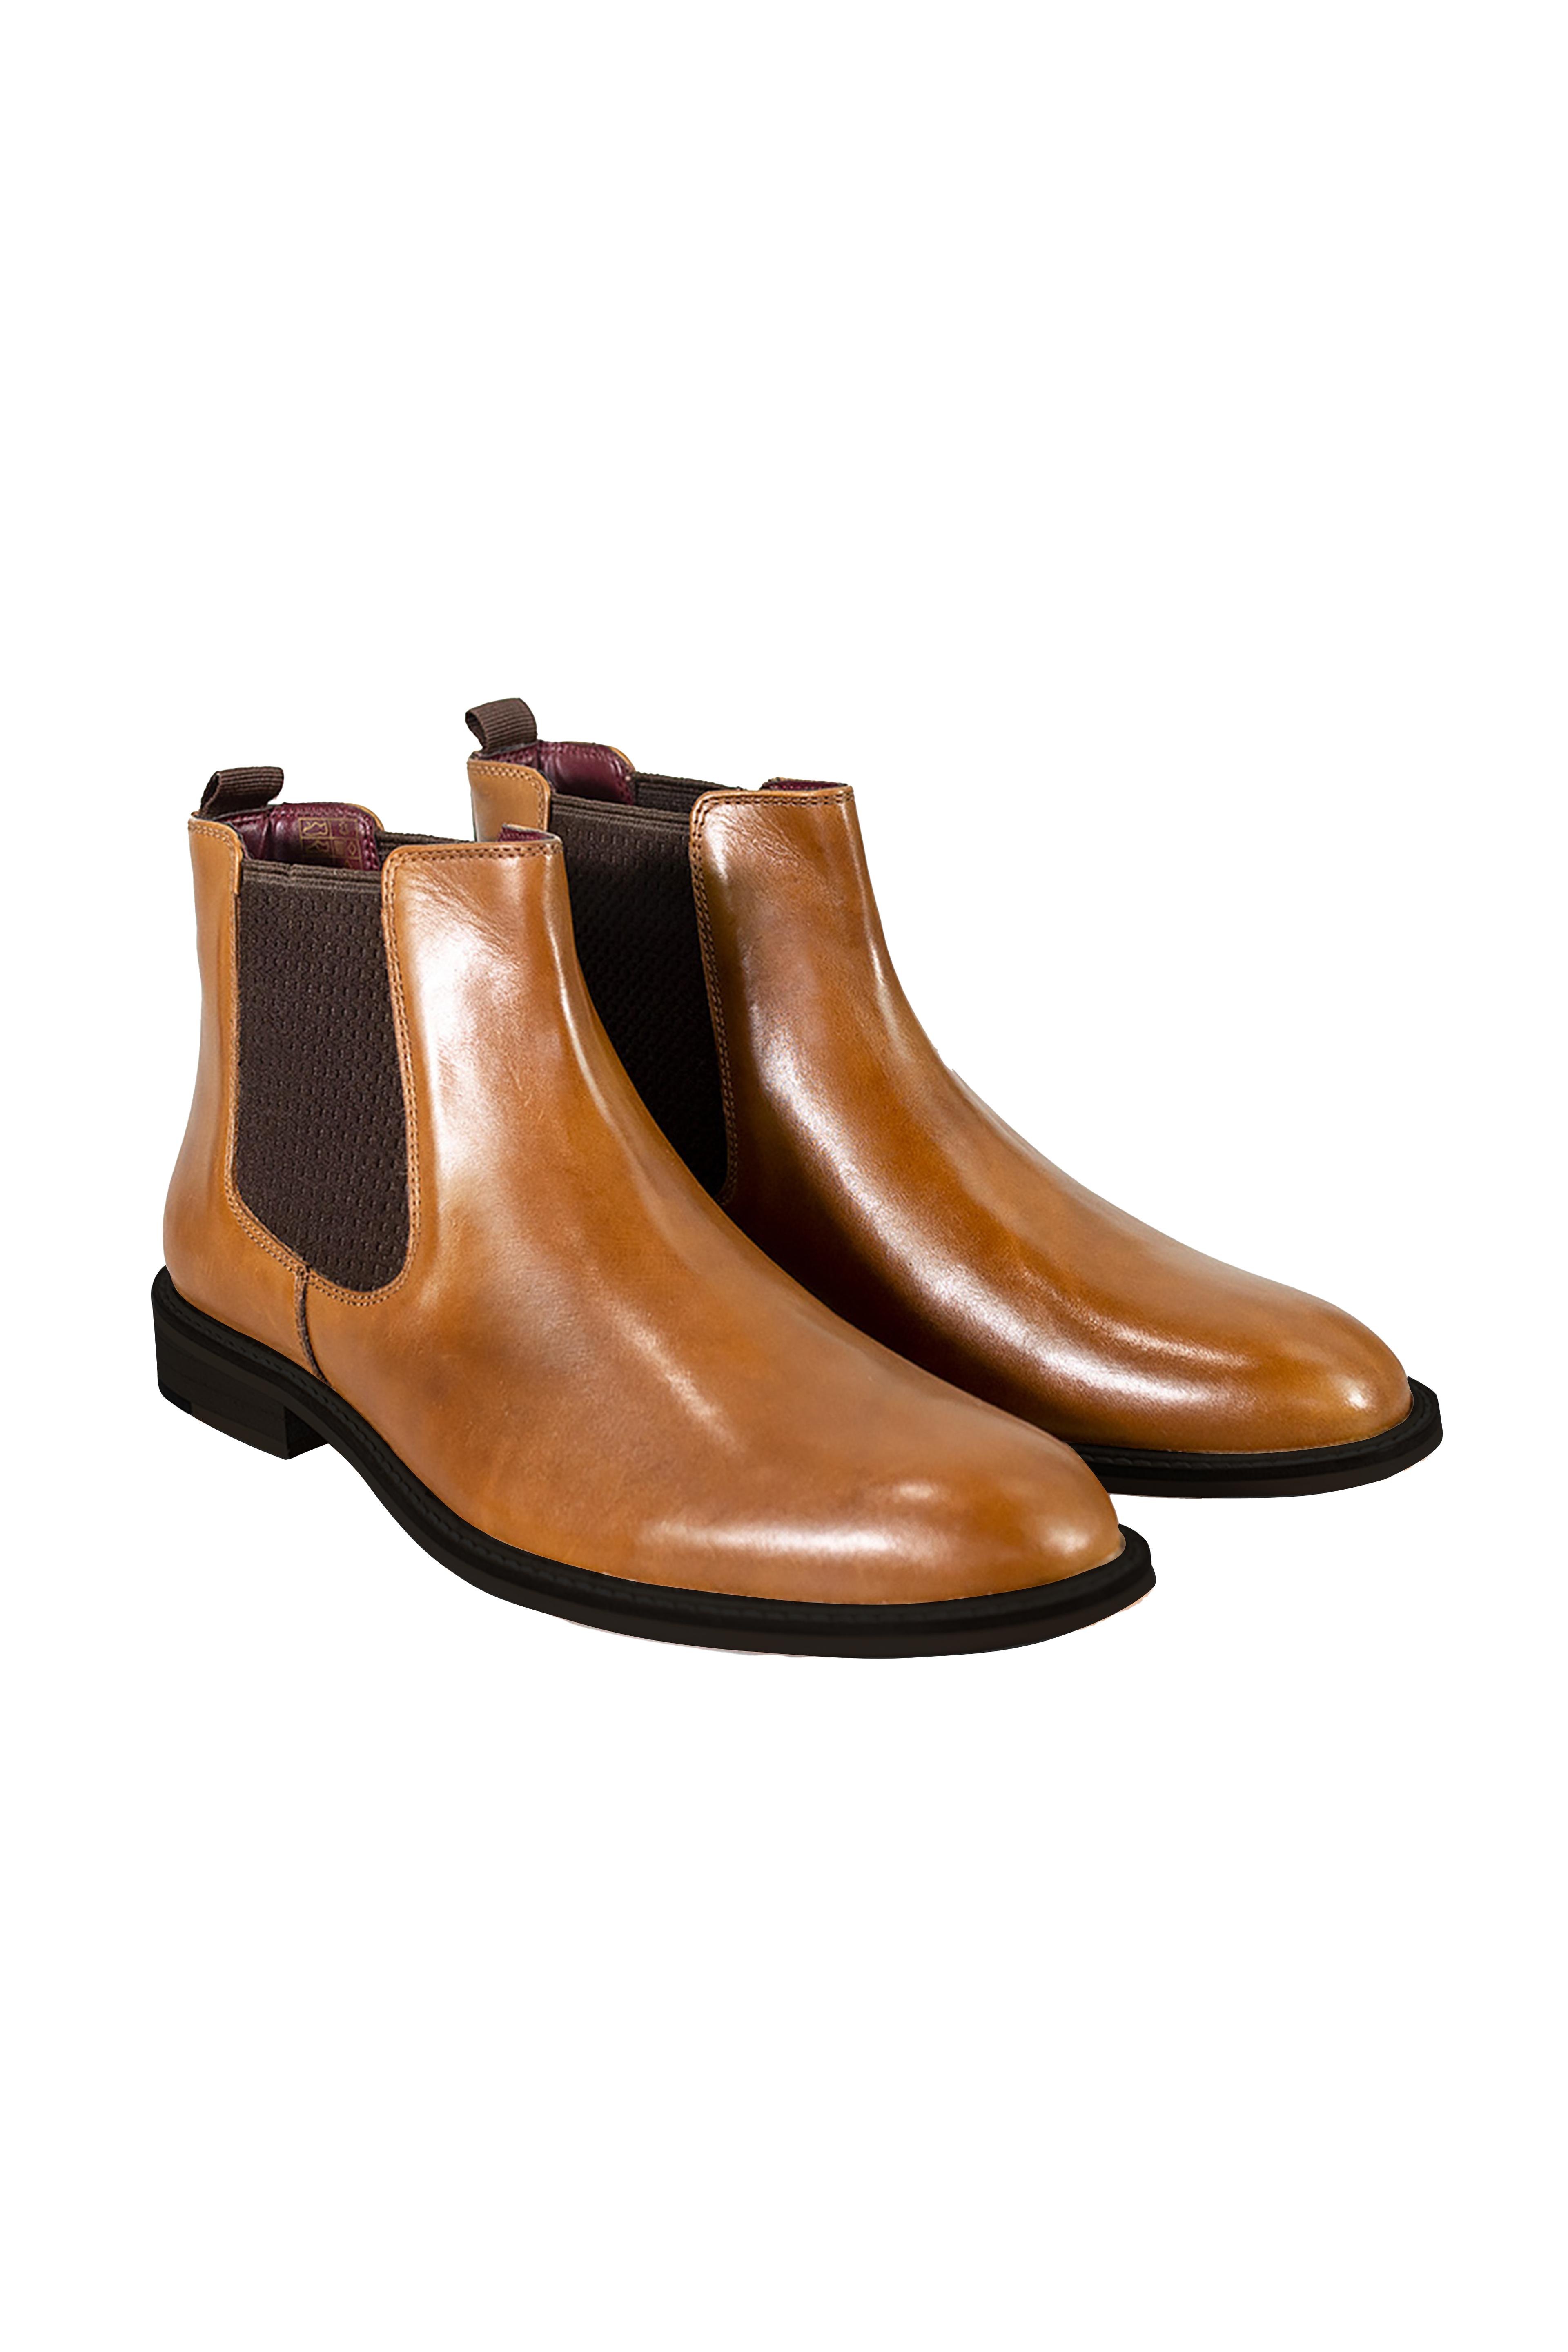 Men's Pull on Leather Chelsea Boots - WATSON Tan 